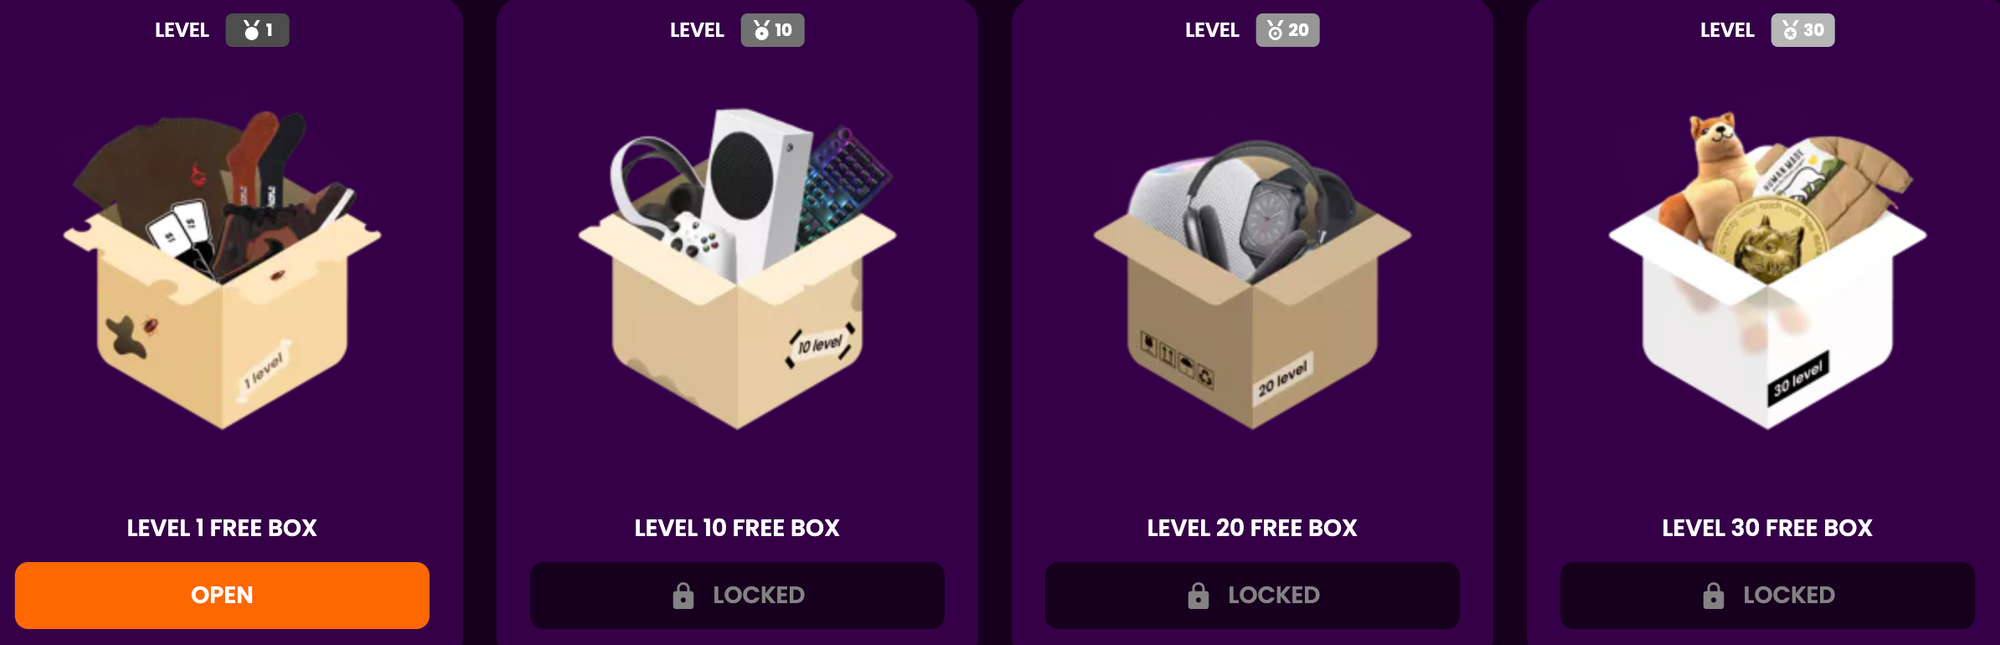 HypeLoot's reward system for mystery boxes 